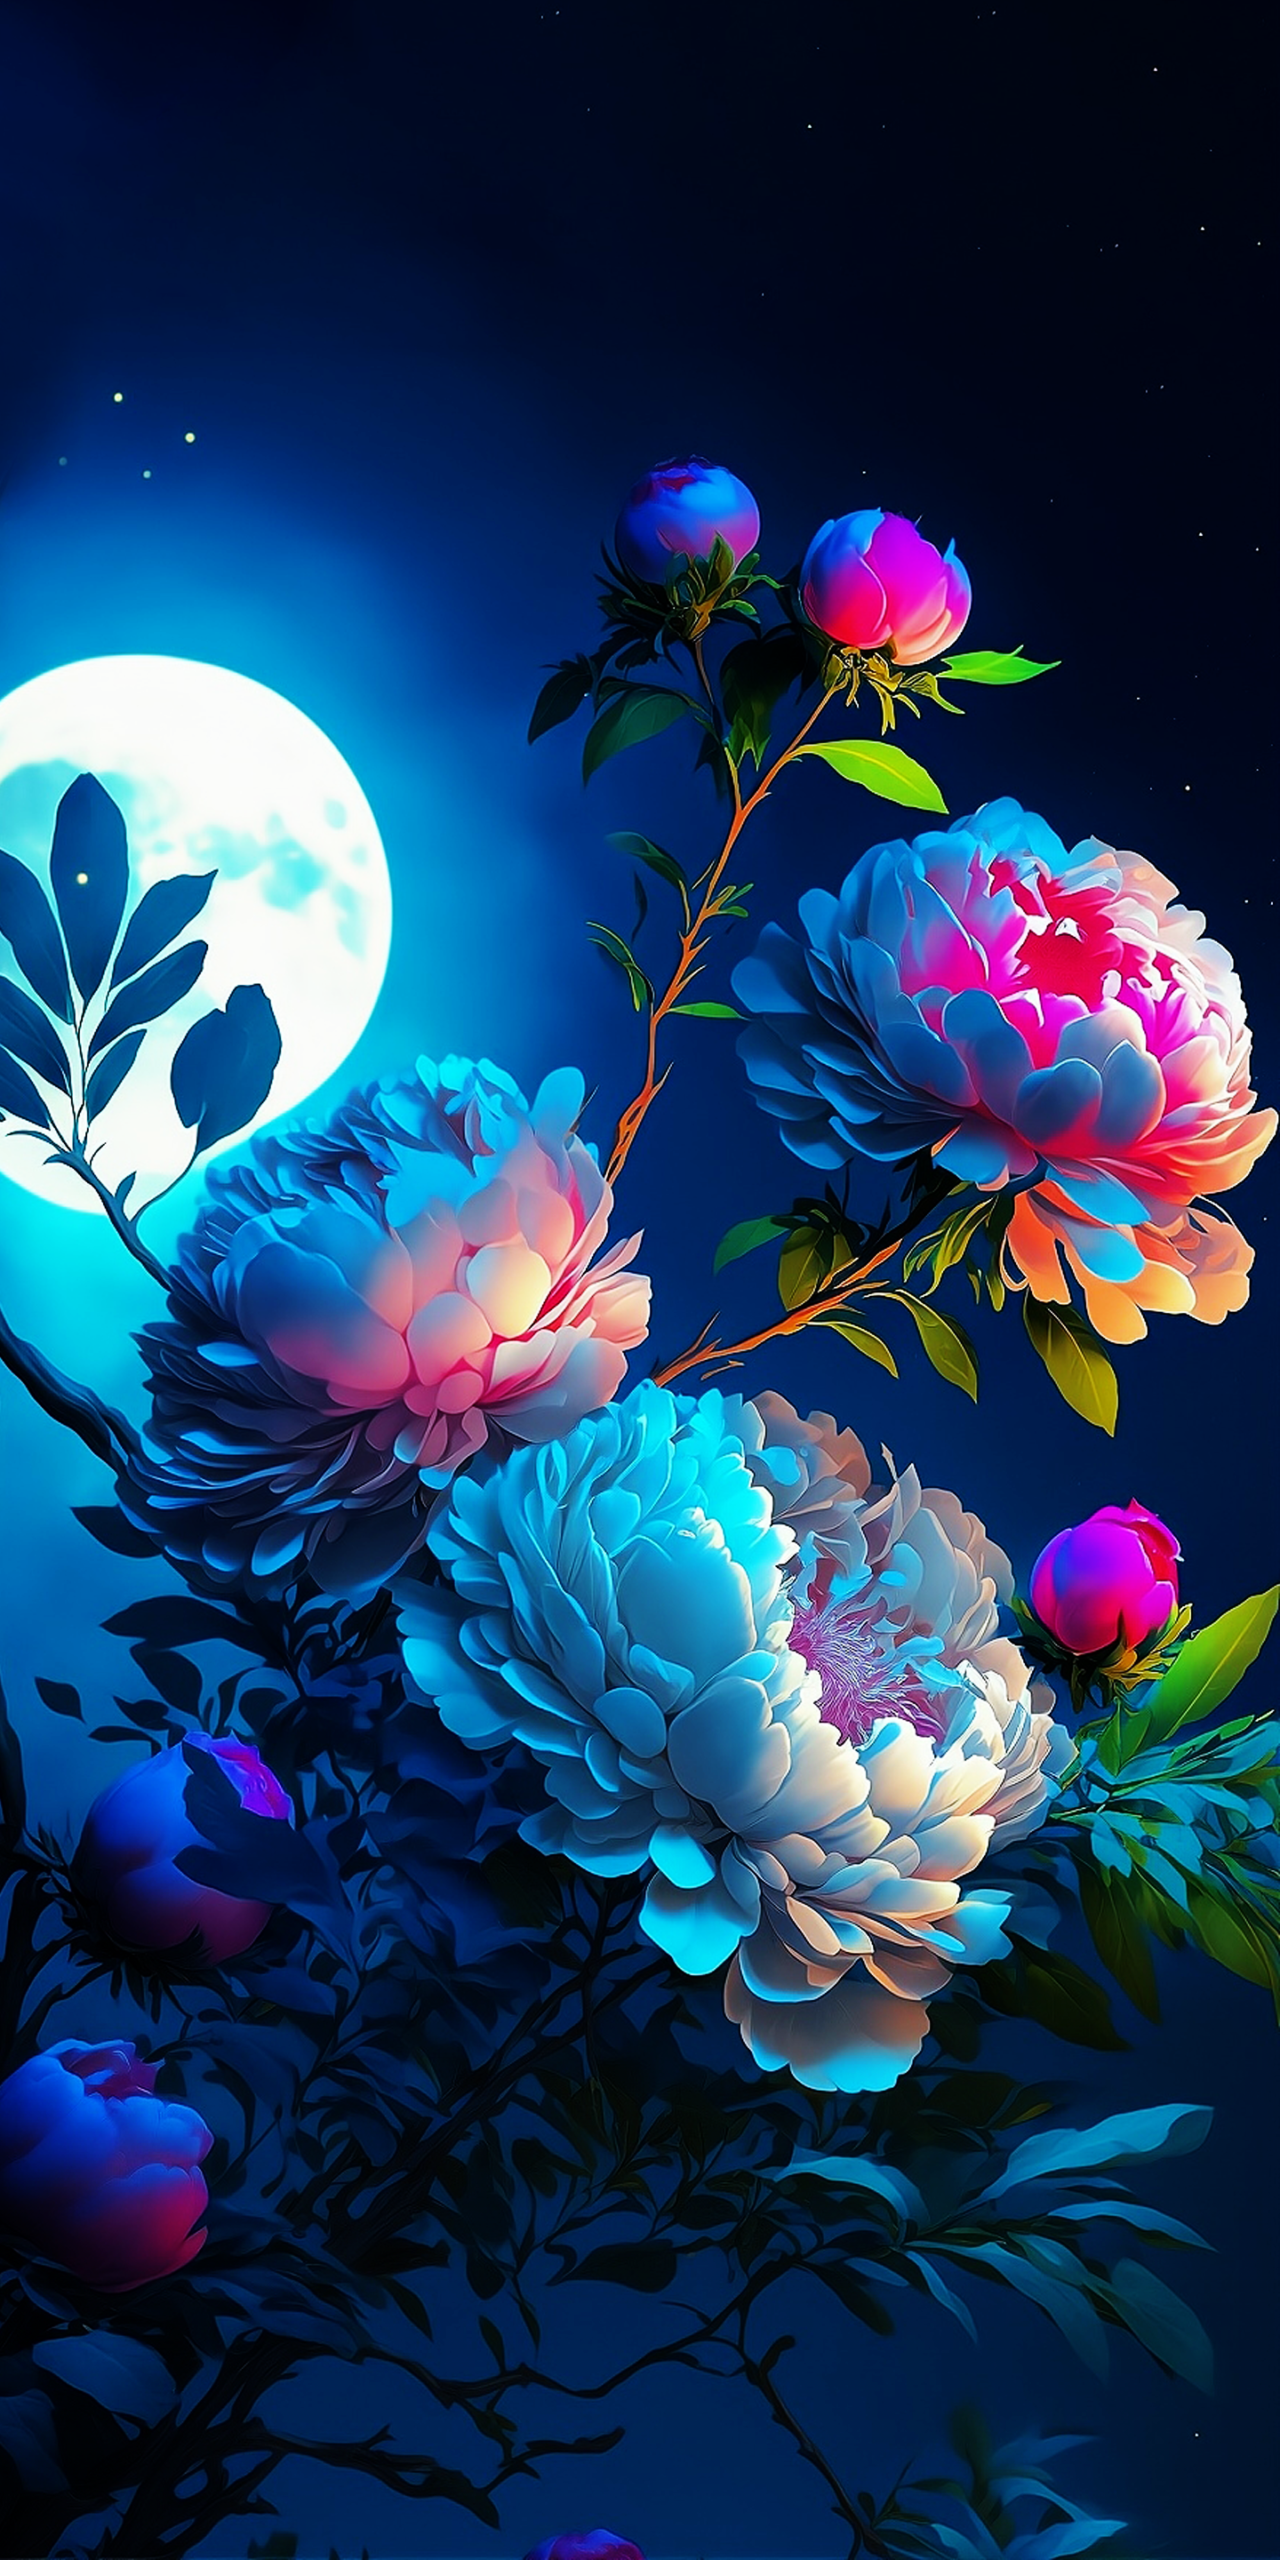 Neon Rose Live Wallpaper 3D Handdrawn and Airbrush crafted  free download